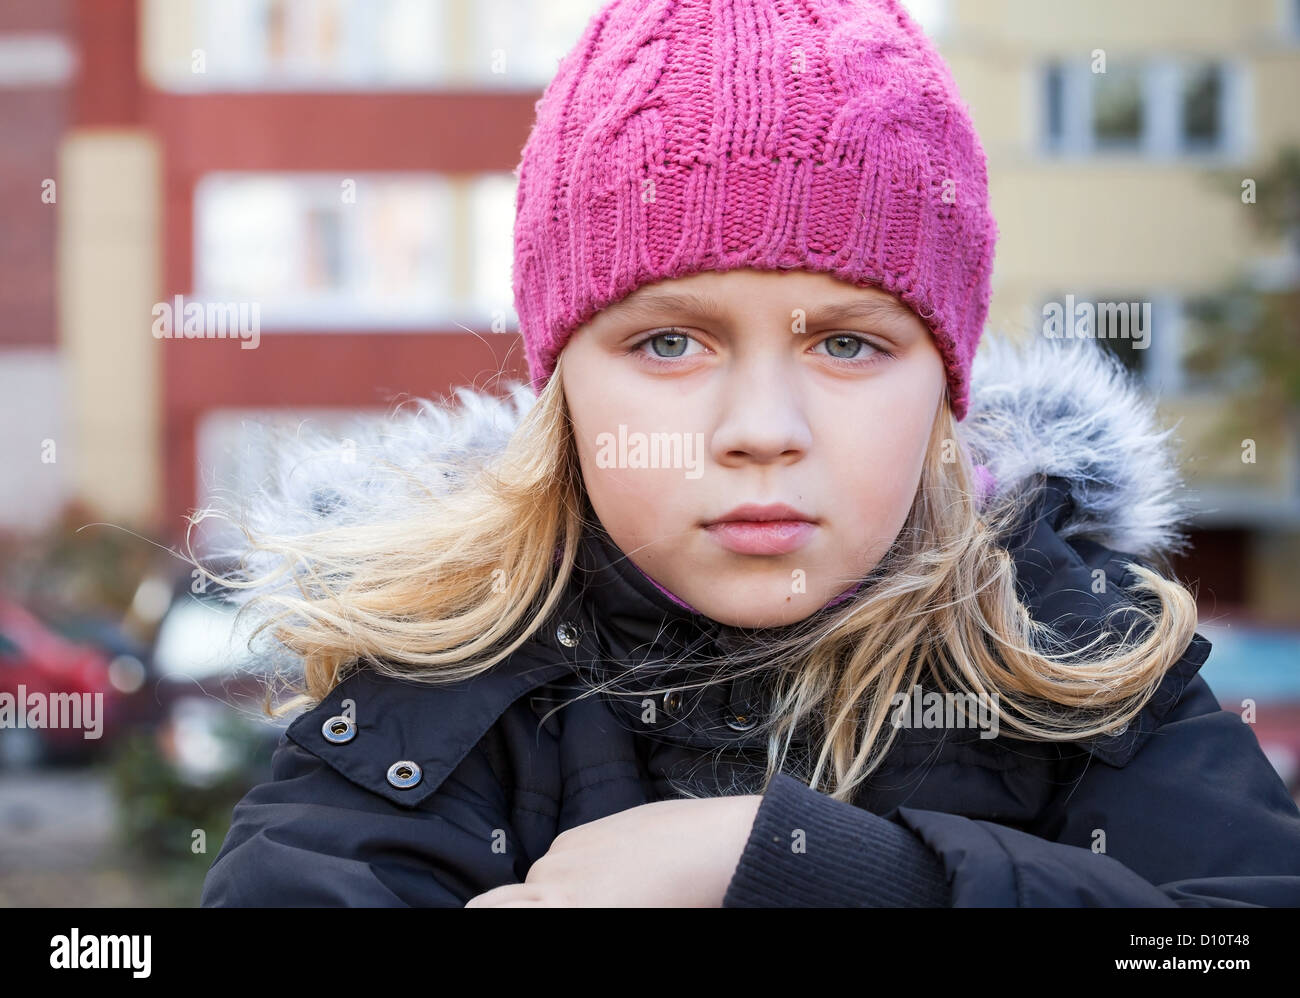 Little beauty blond girl looks thoughtfully into the distance. Outdoor street city portrait. Stock Photo